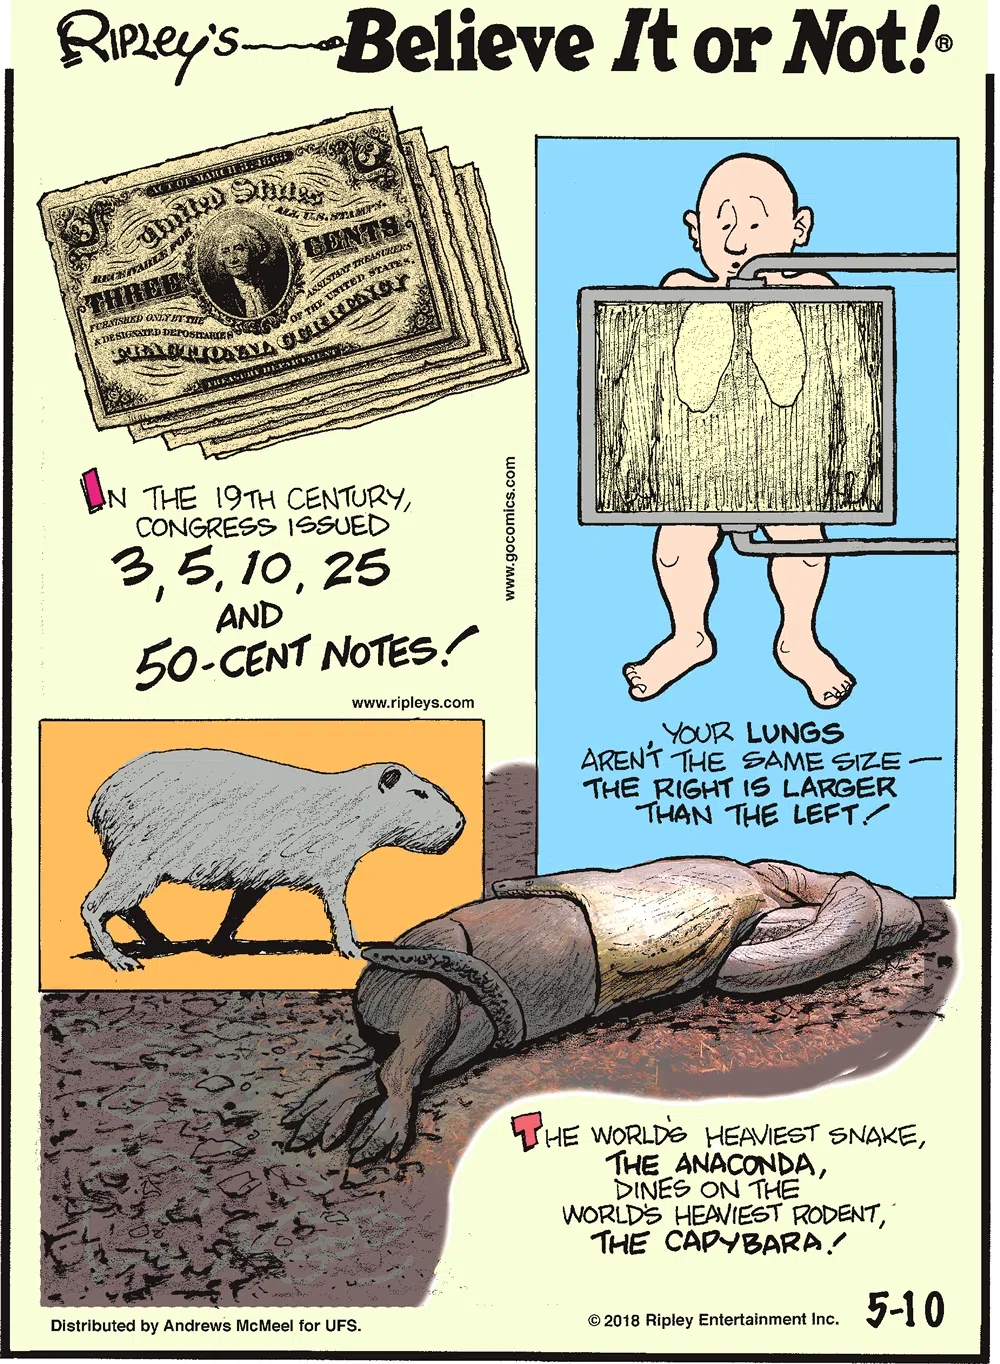 In the 19th century, Congress issued 3, 5, 10, 25 and 50-cent notes!-------------------- Your lungs aren't the same size - the right is larger than the left!-------------------- The world's heaviest snake, the anaconda, dines on the world's heaviest rodent, the capybara.